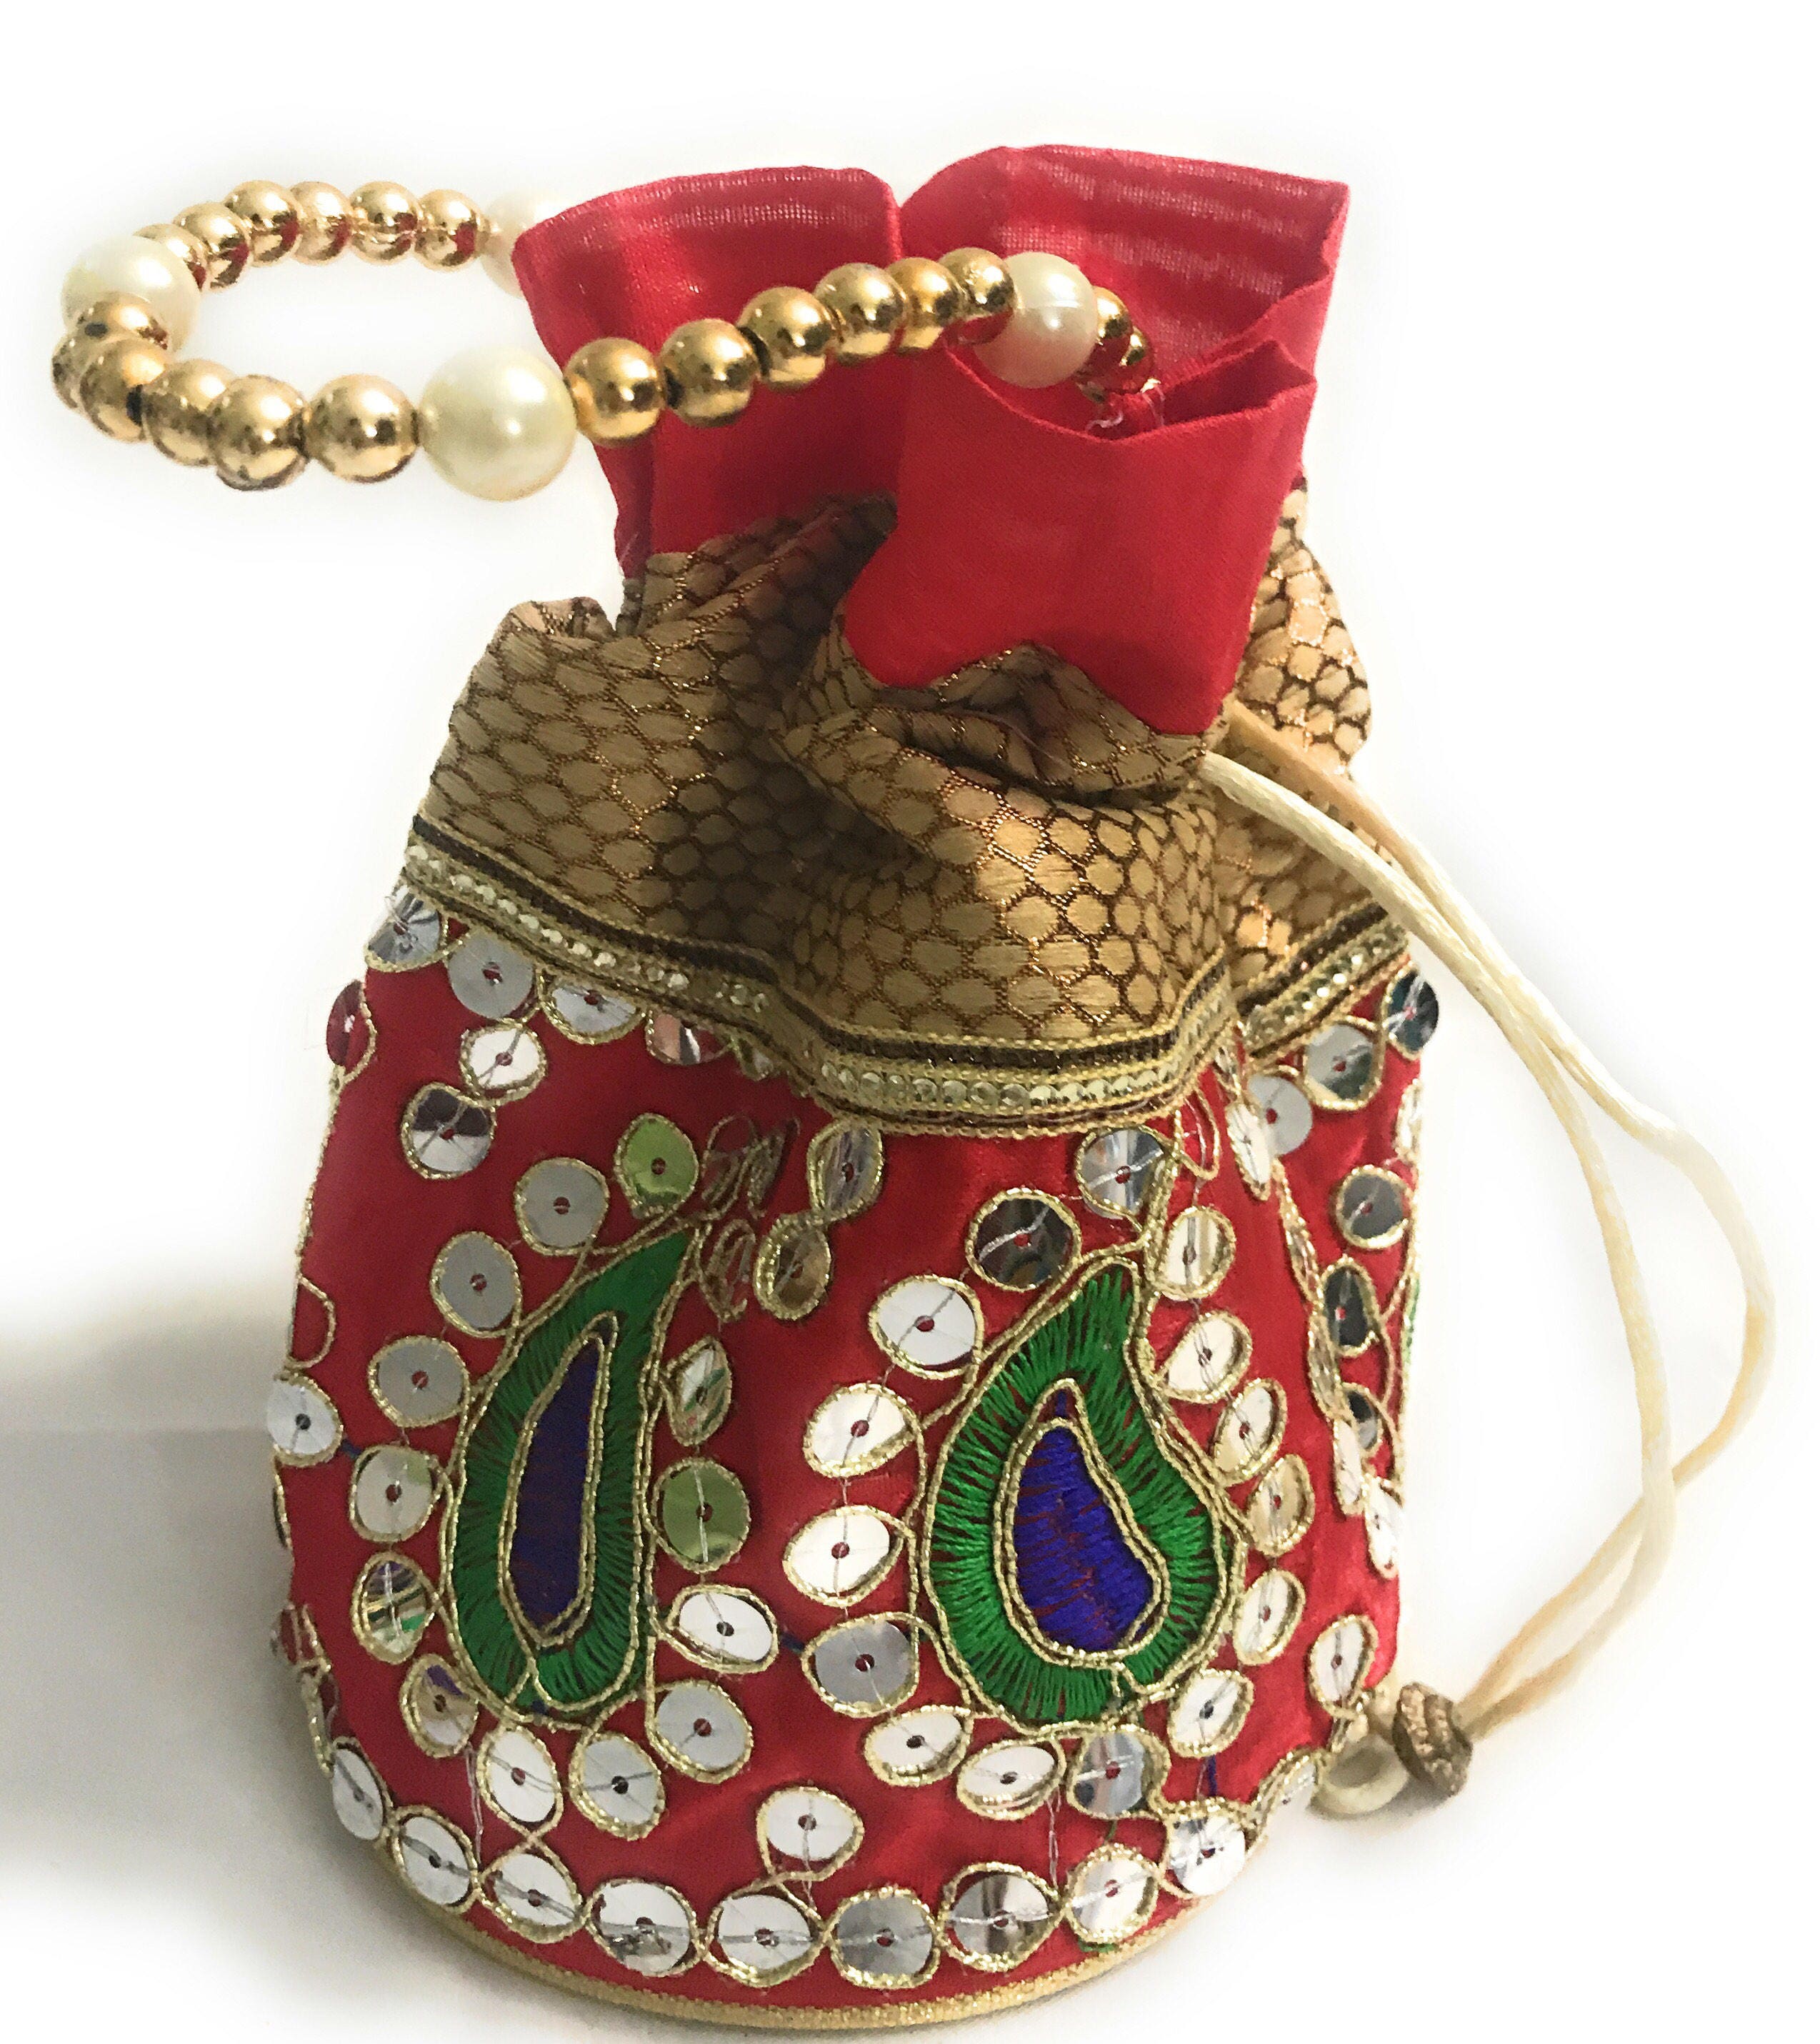 Blue Indian style Purse - Potli Bags Online in USA – B Anu Designs